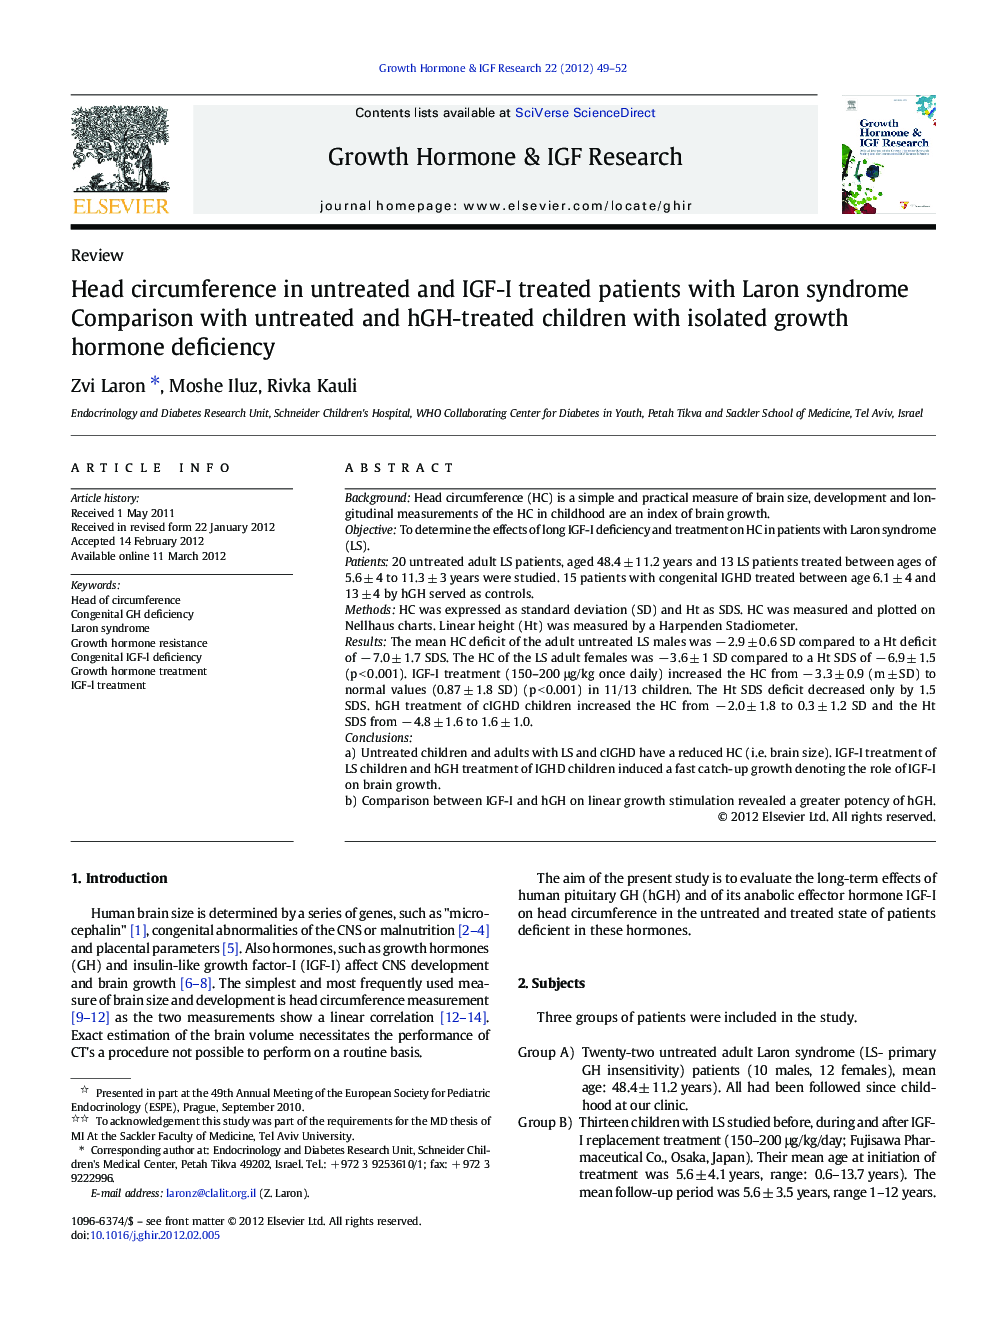 Head circumference in untreated and IGF-I treated patients with Laron syndrome : Comparison with untreated and hGH-treated children with isolated growth hormone deficiency